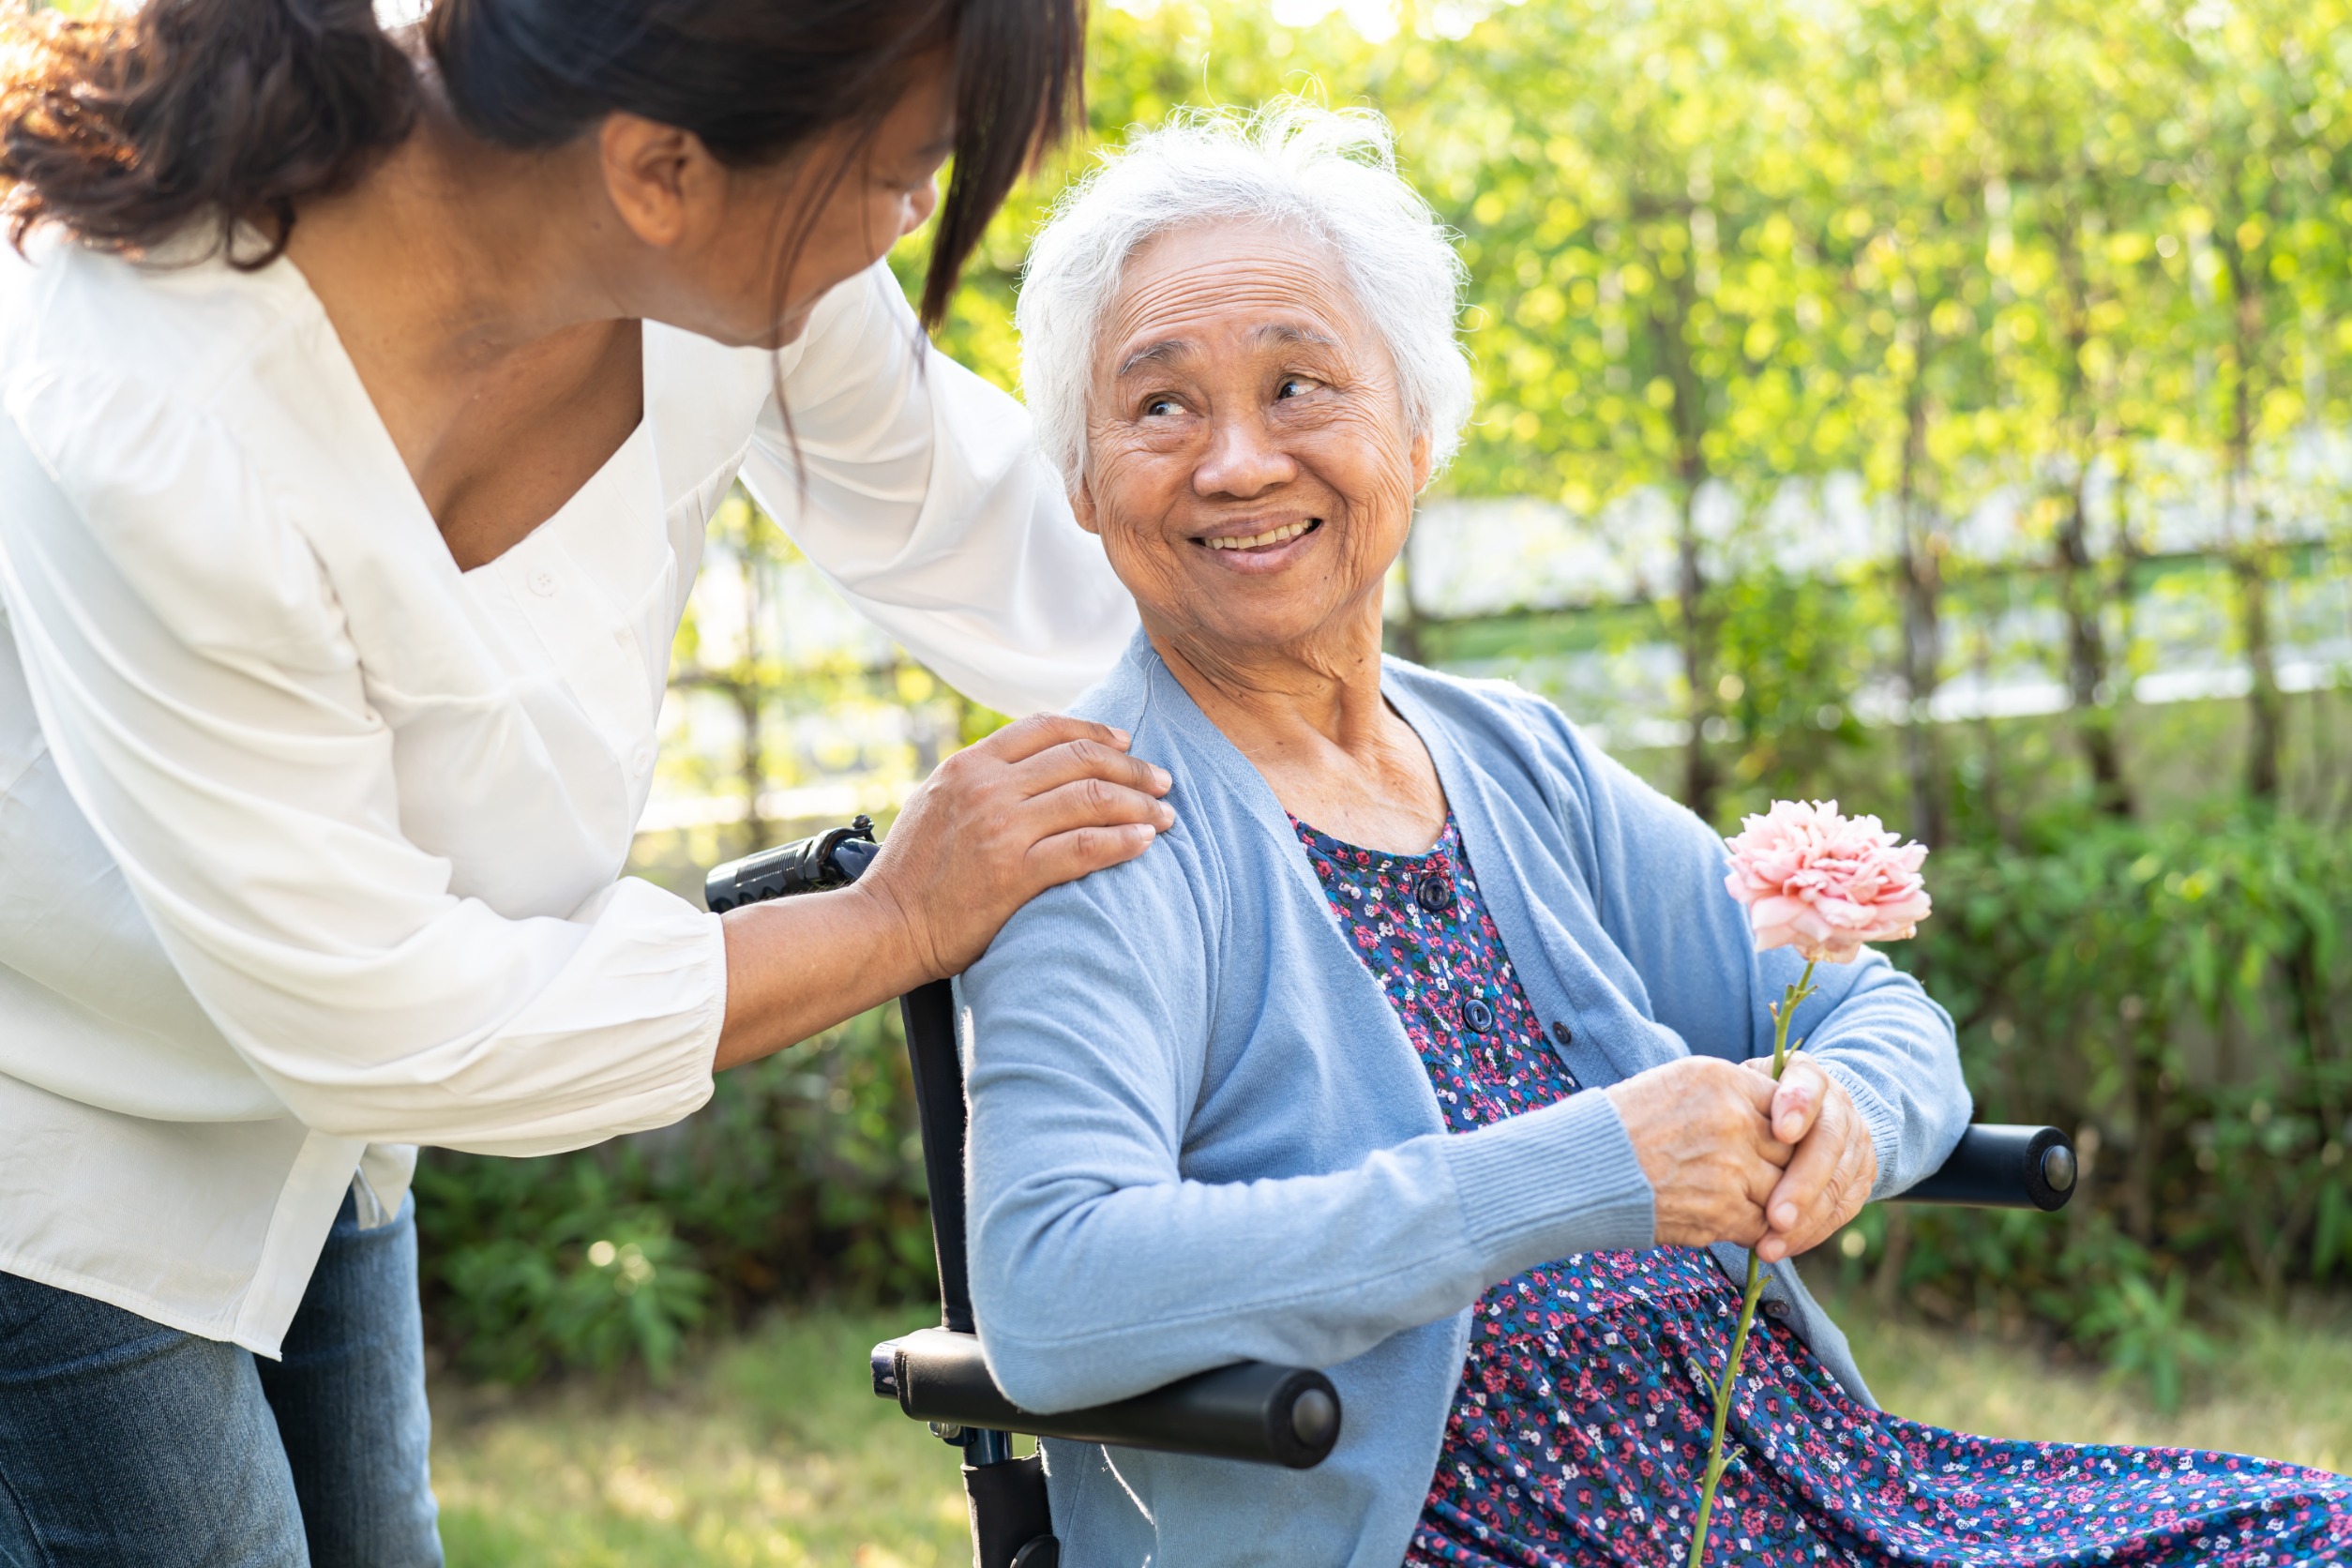 Minimize Hospital Readmissions Through Home Care Services